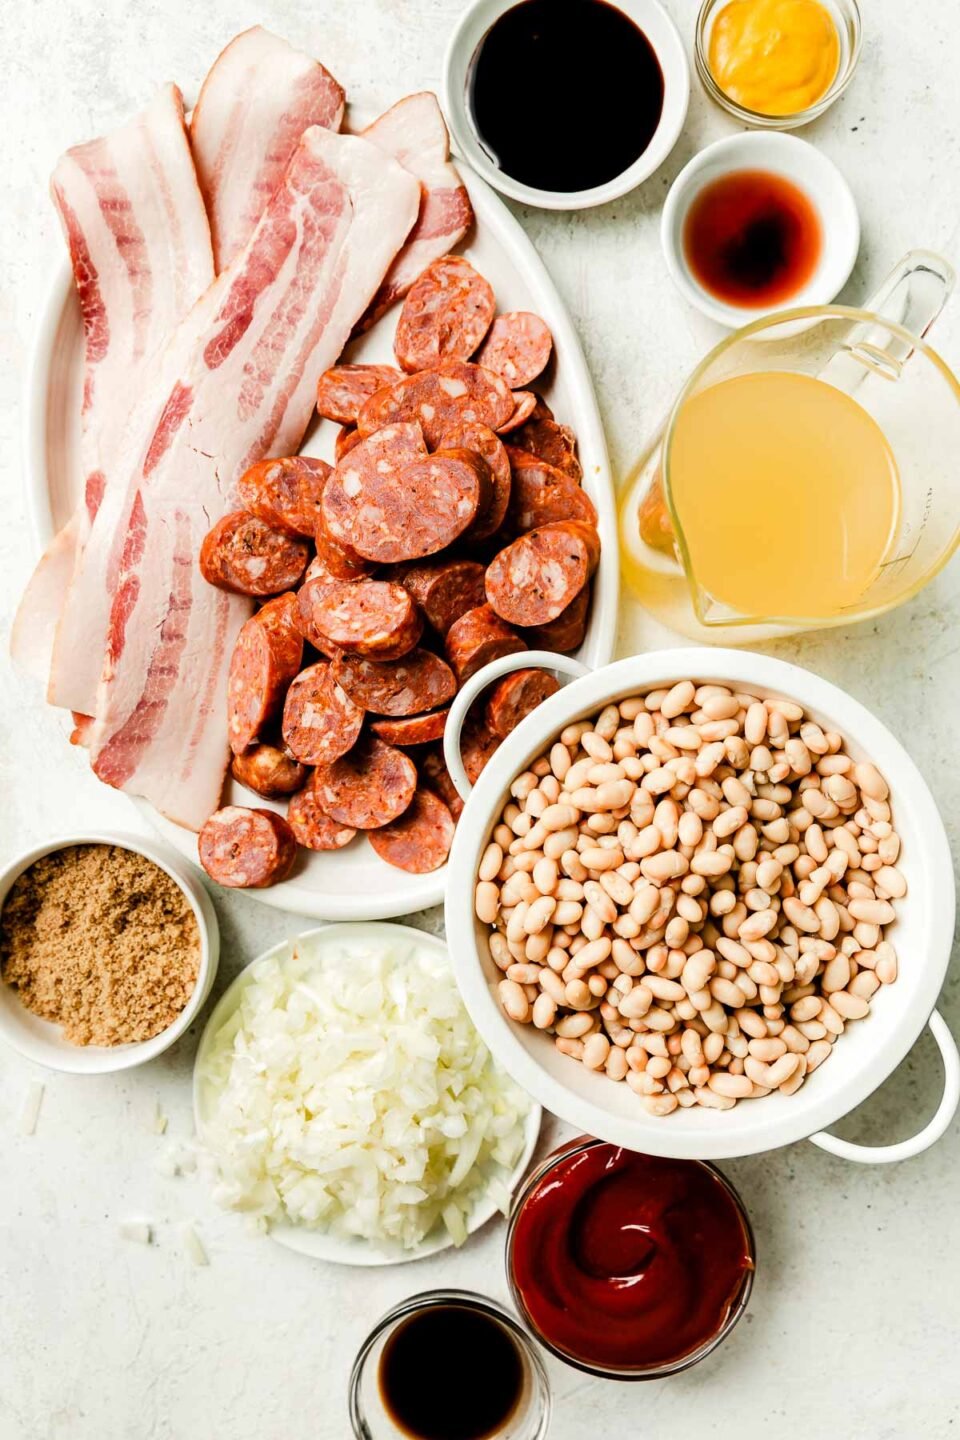 Brown sugar baked beans ingredients sit atop a white textured surface: beans, sliced sausage, raw bacon, chopped onions and sauce ingredients.